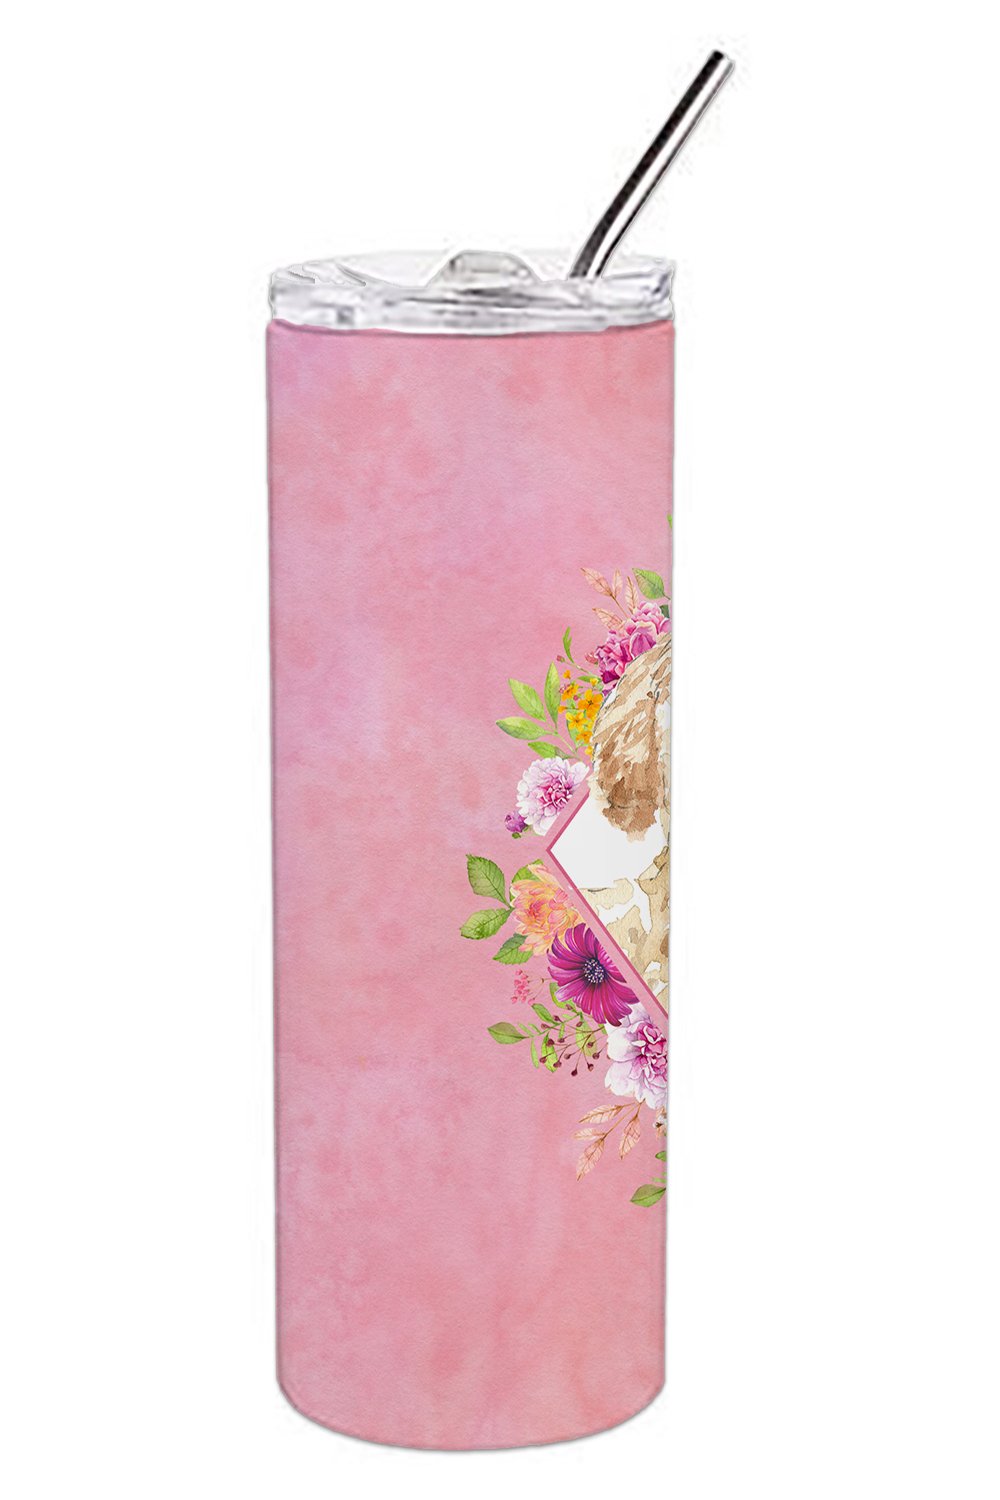 Goldendoodle Pink Flowers Double Walled Stainless Steel 20 oz Skinny Tumbler CK4236TBL20 by Caroline's Treasures